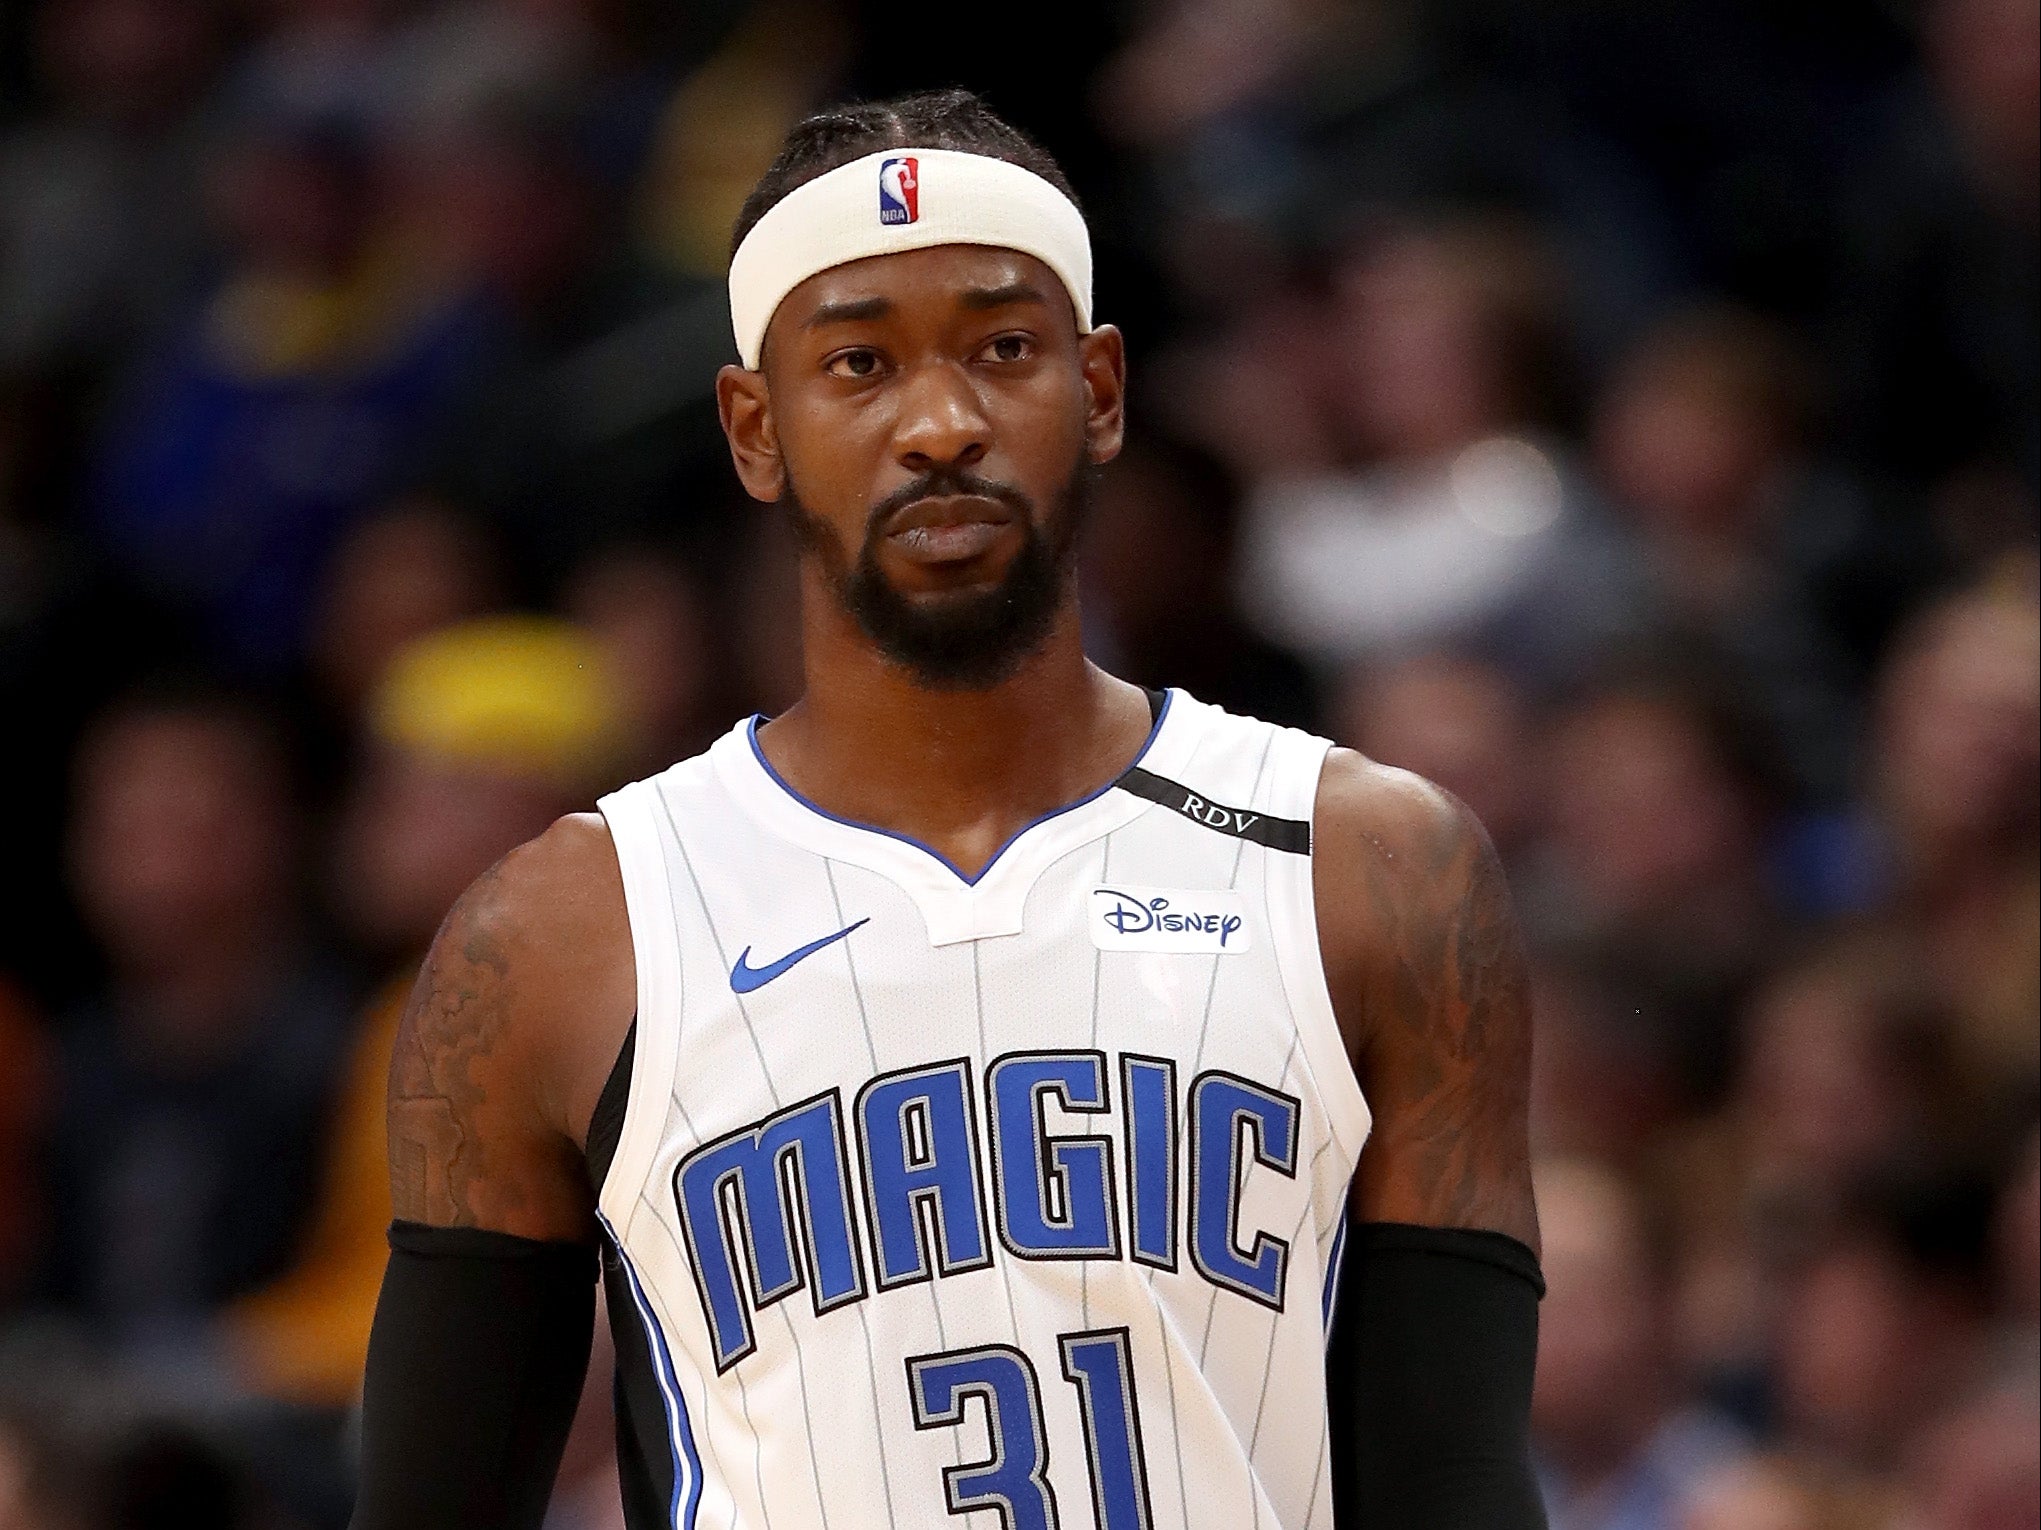 Terrence Ross #31 of the Orlando Magic plays the Denver Nuggets at the Pepsi Center on 23 November, 2018 in Denver, Colorado